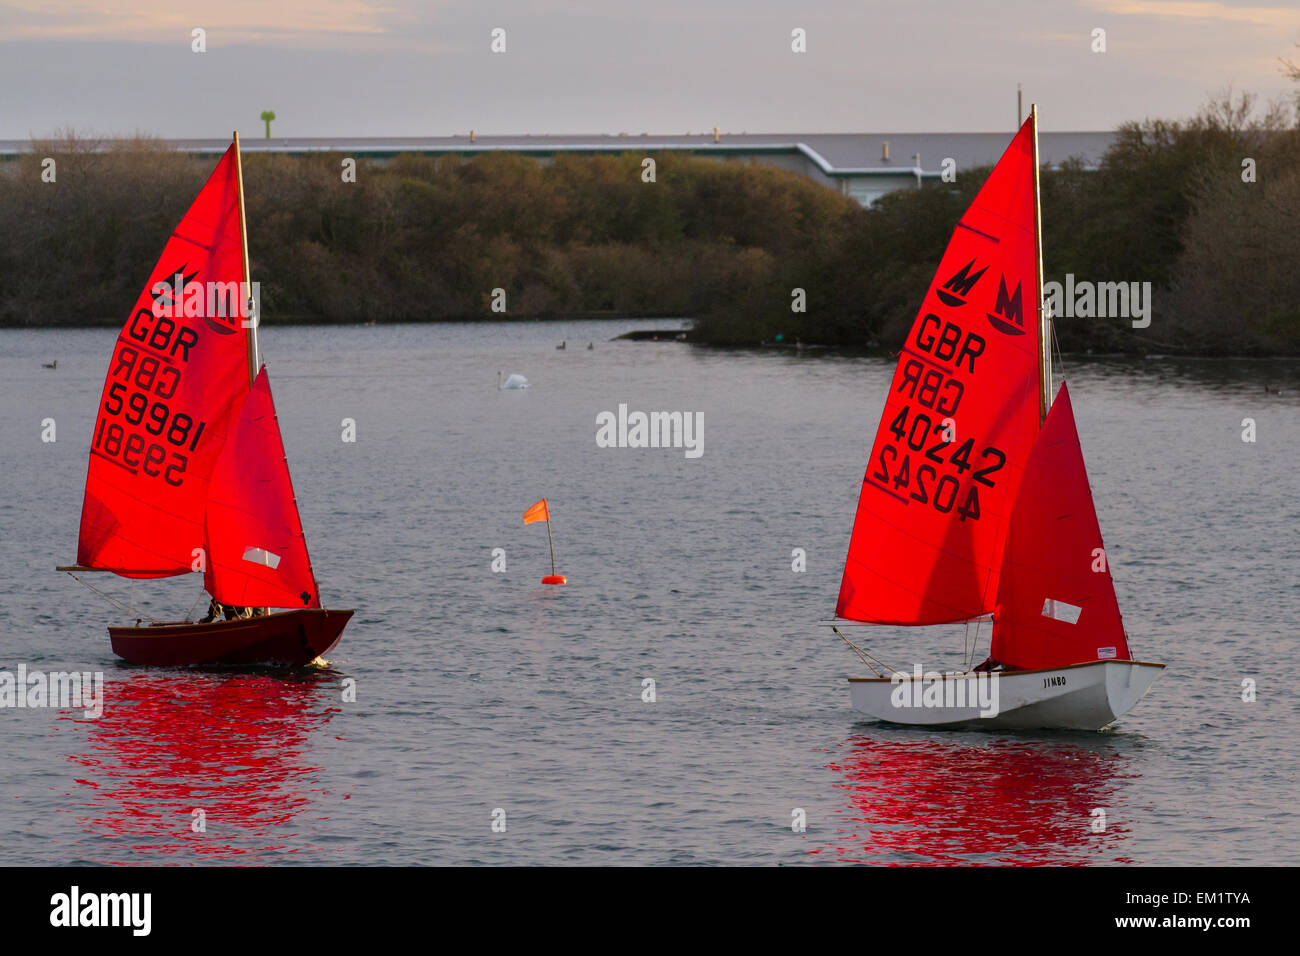 Southport, Merseyside, UK 15th April, 2015. UK Weather. 'Ladies who Launch' Sunset evening Sail. West Lancashire Yacht Club members sailing in Marine Lake regatta at dusk. The West Lancashire Yacht Club (WLYC) is a yacht club in Merseyside, England, founded in 1894. I Stock Photo